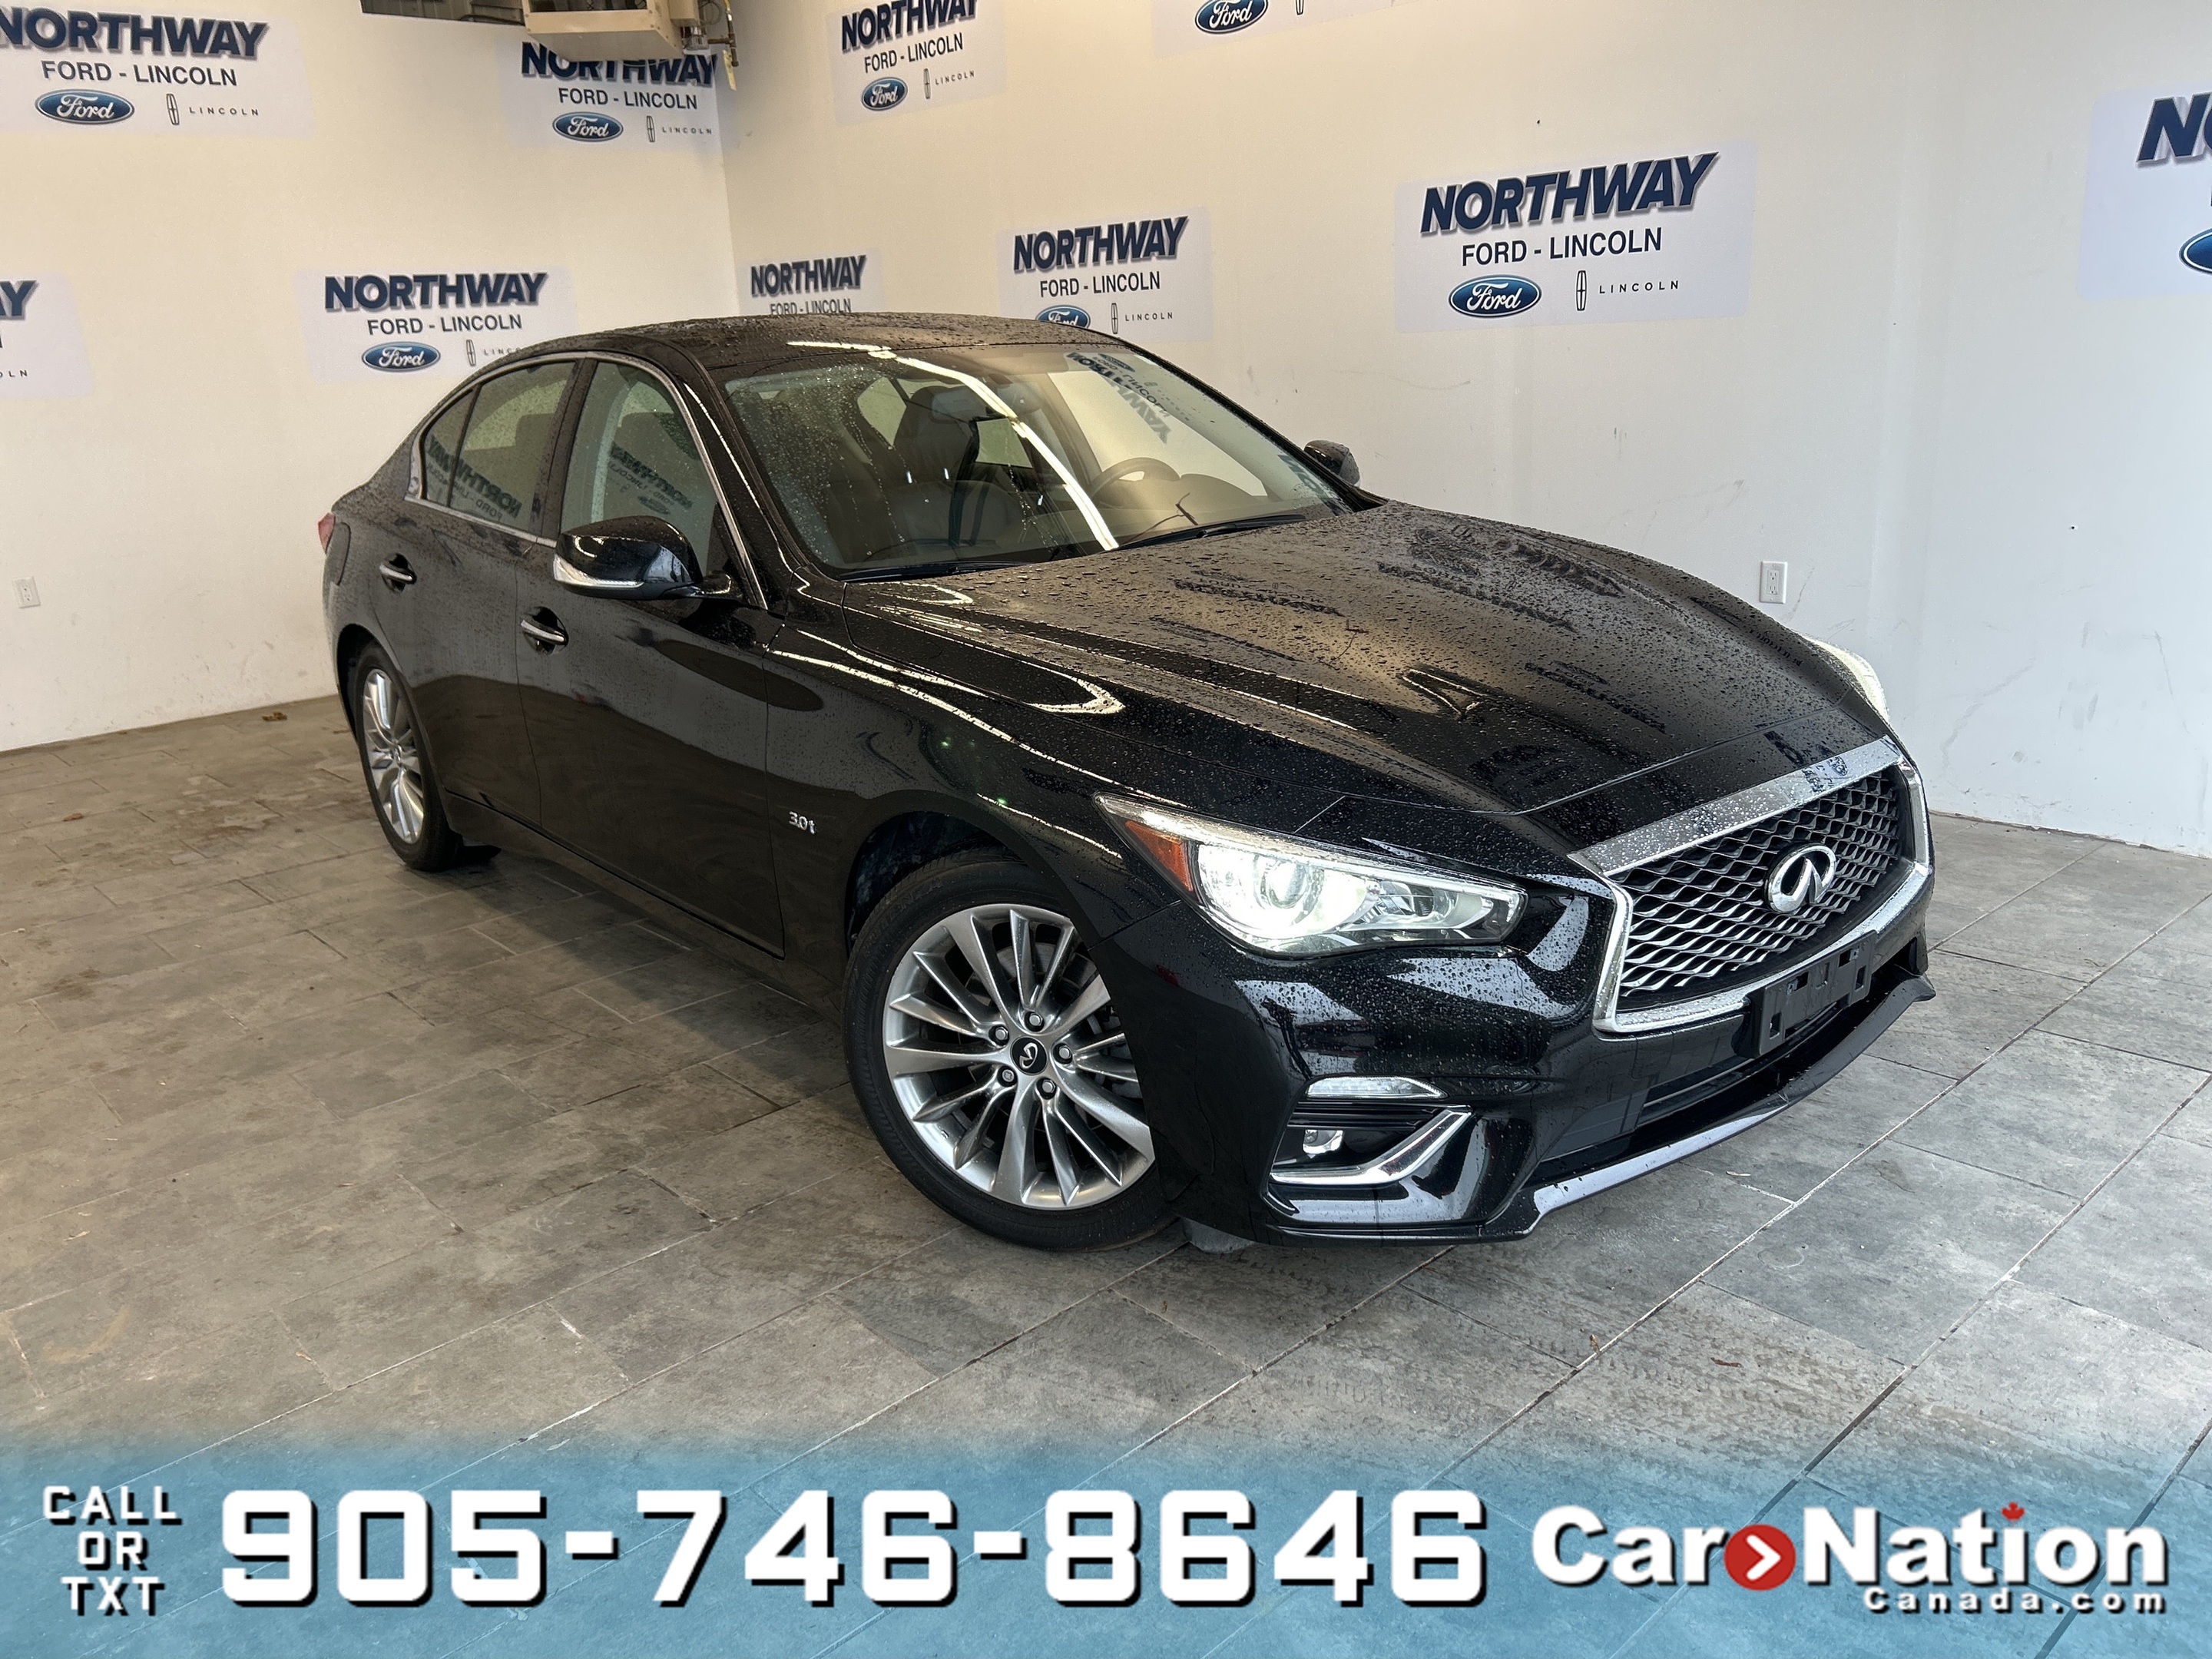 2019 Infiniti Q50 LUXE |3.0T |AWD | LEATHER | SUNROOF | NAV |1 OWNER